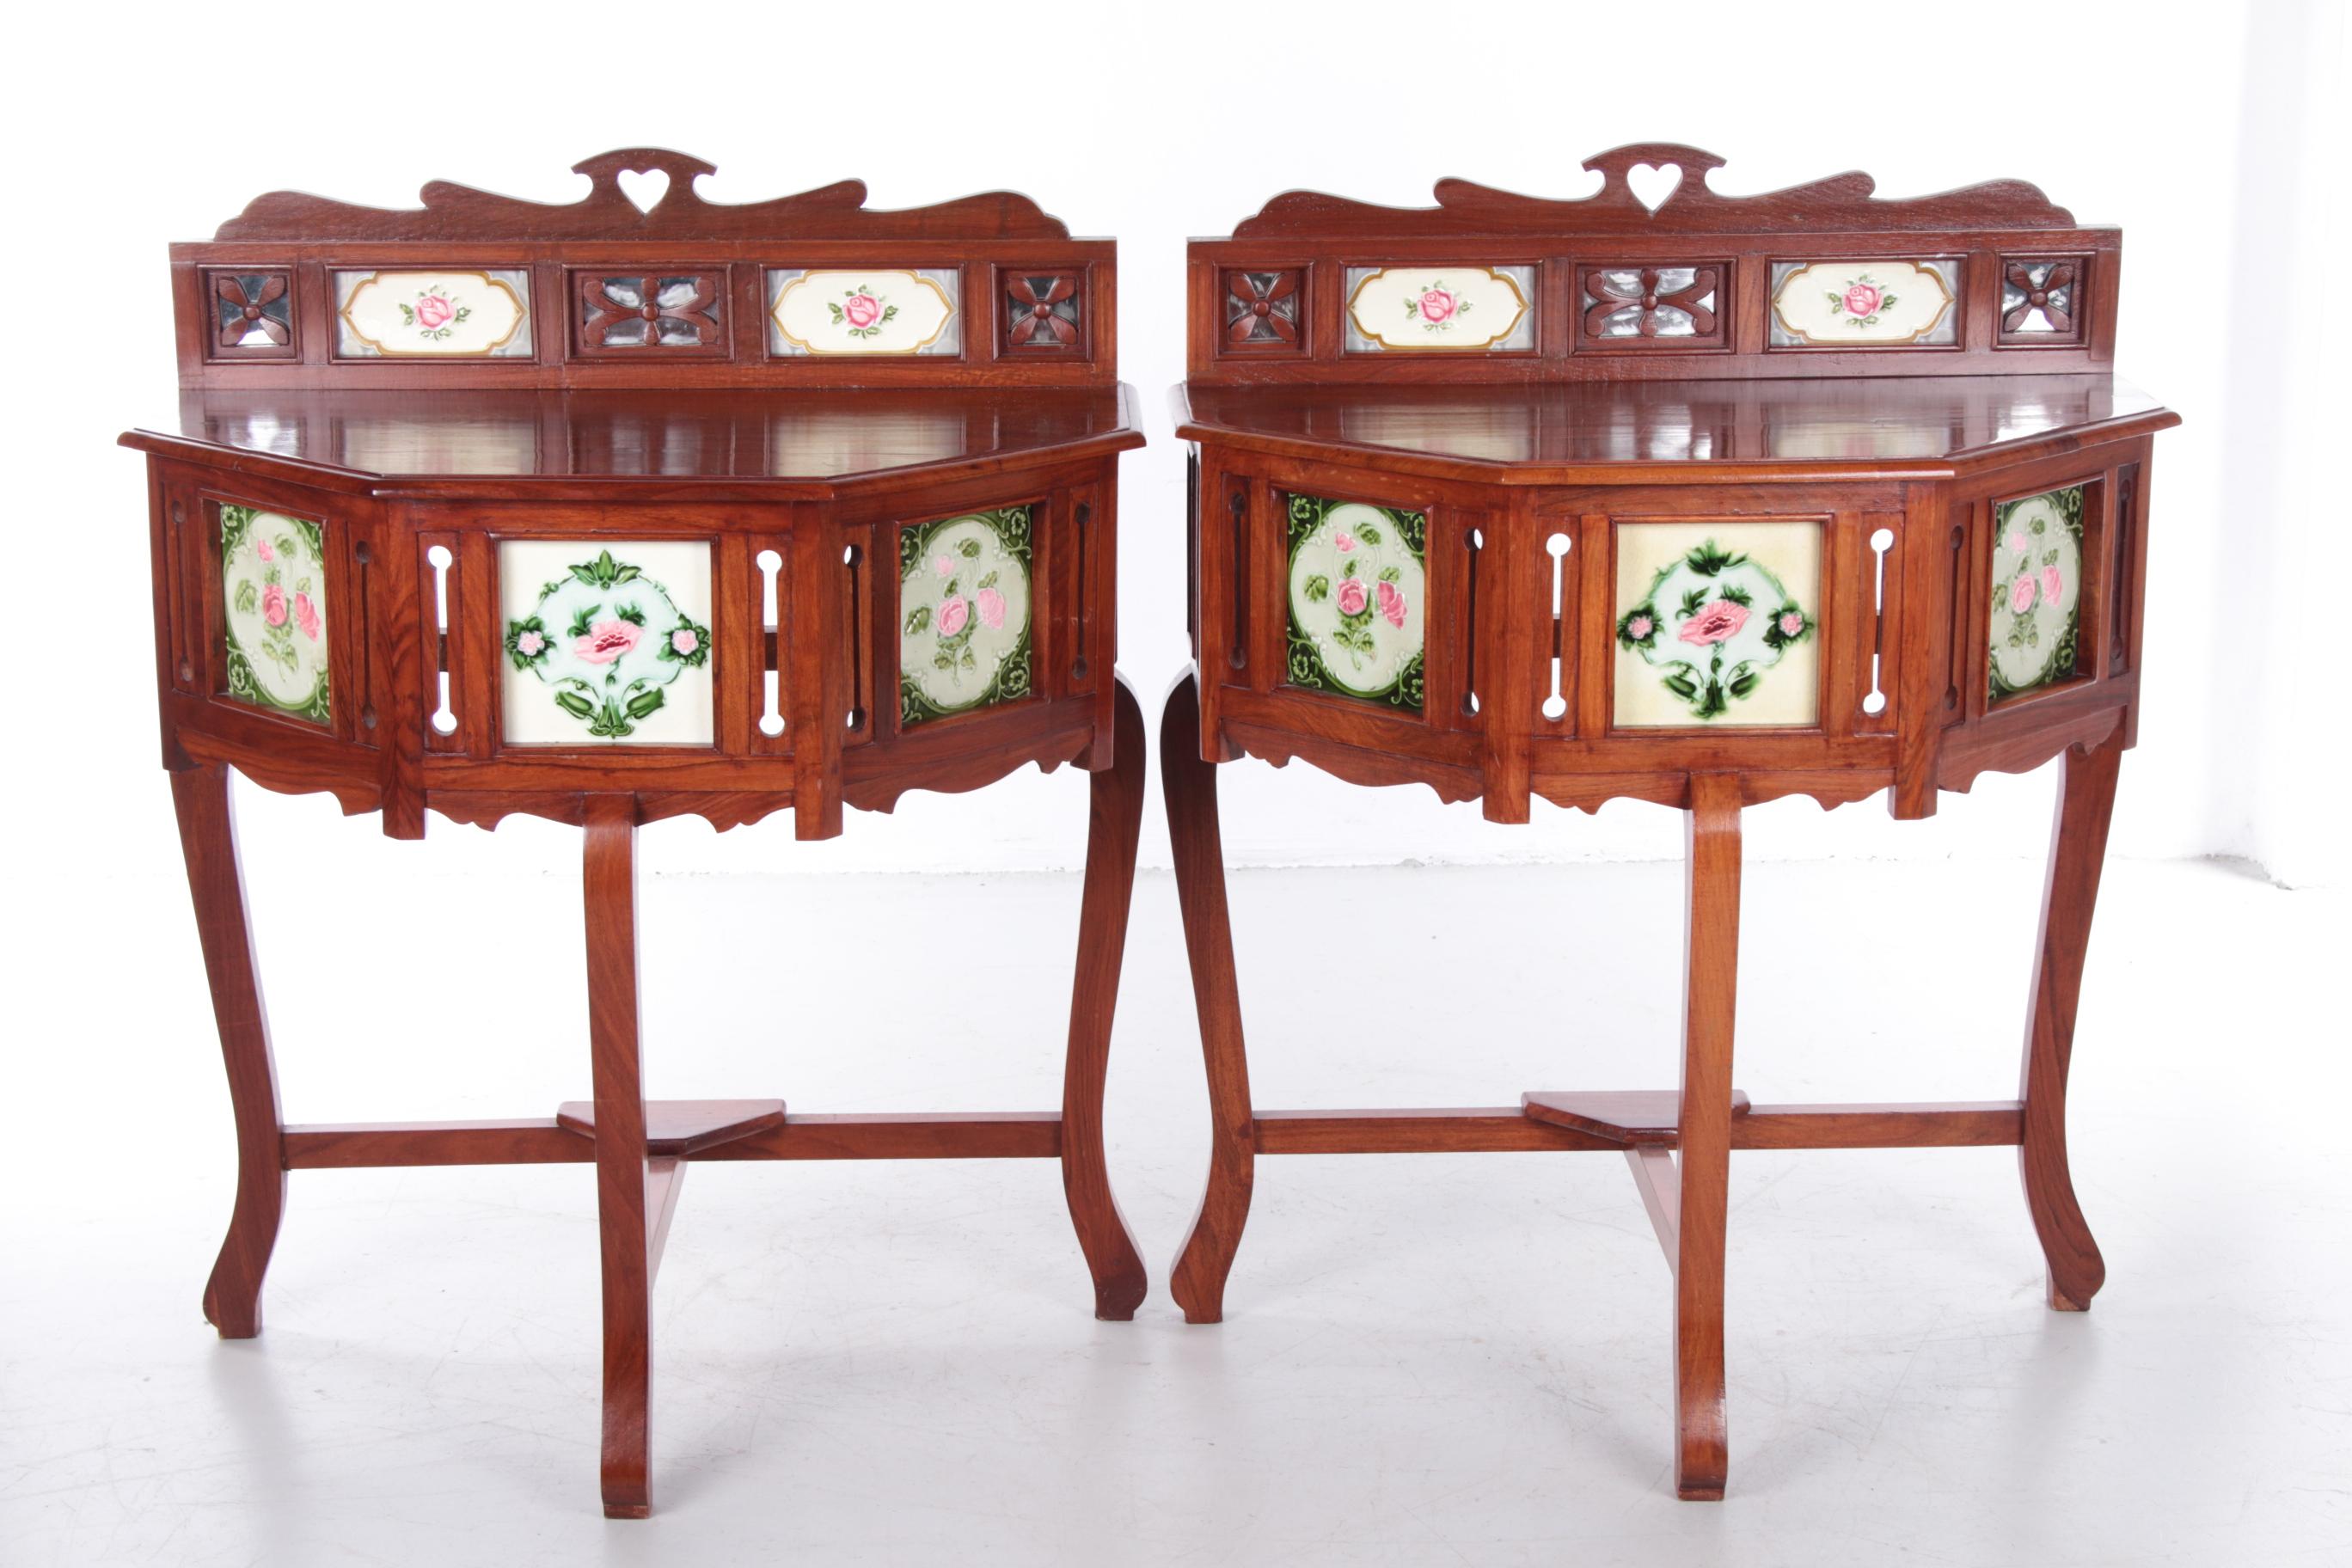 Colonial Revival Set Portuguese Colonial Wall Nightstands by Meranti with Tiles, 1930